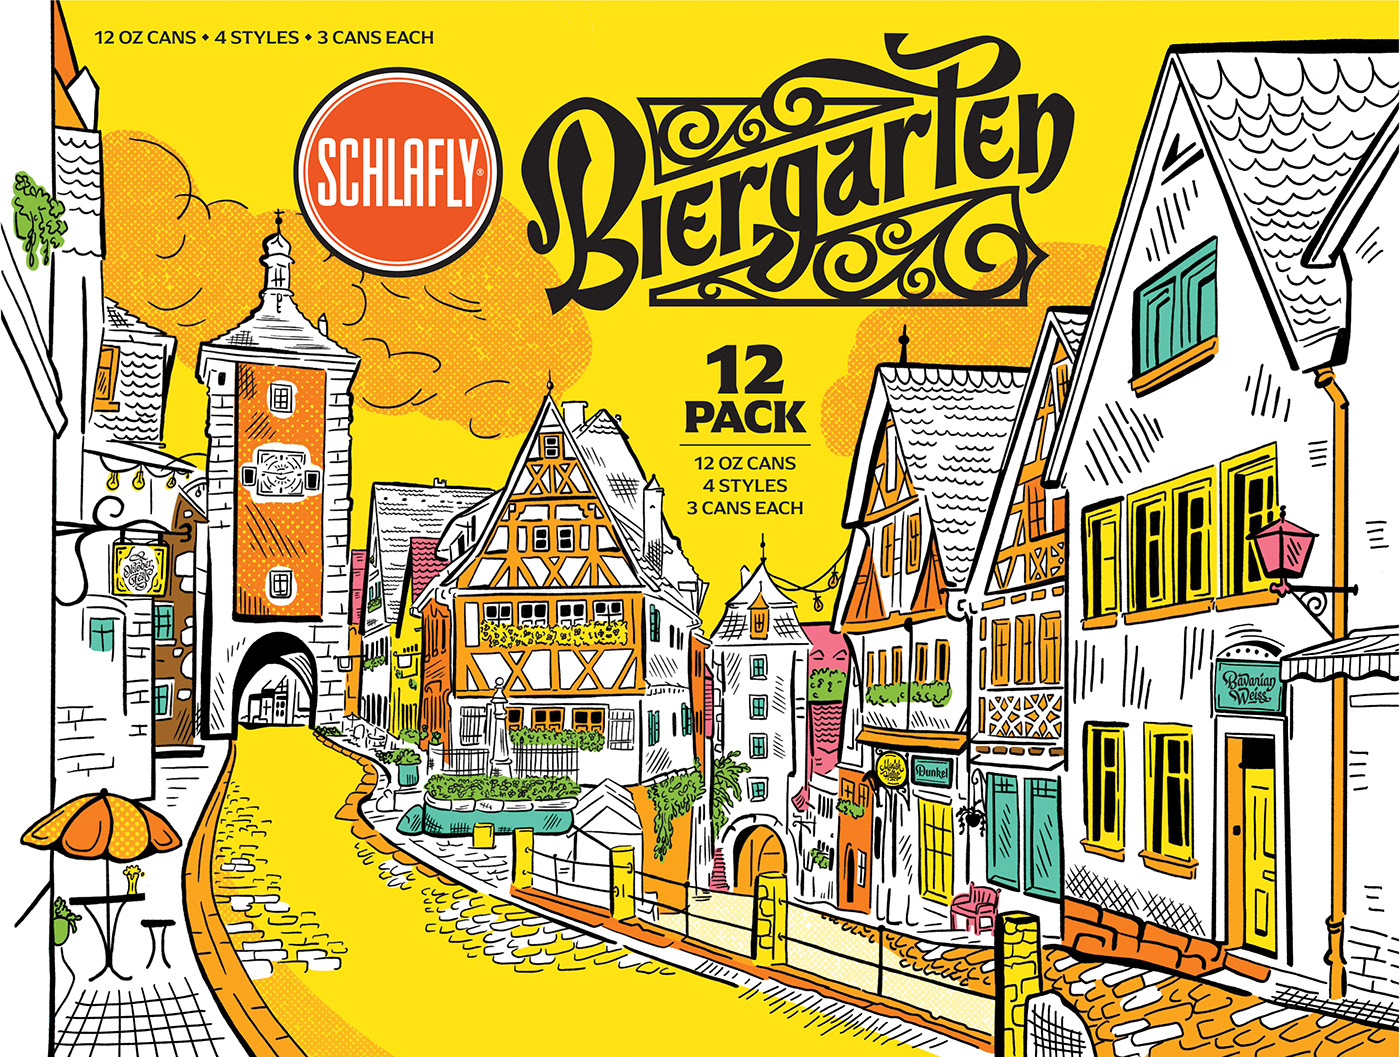 Minimalistic drawing of German style houses and architecture for beer packaging. 